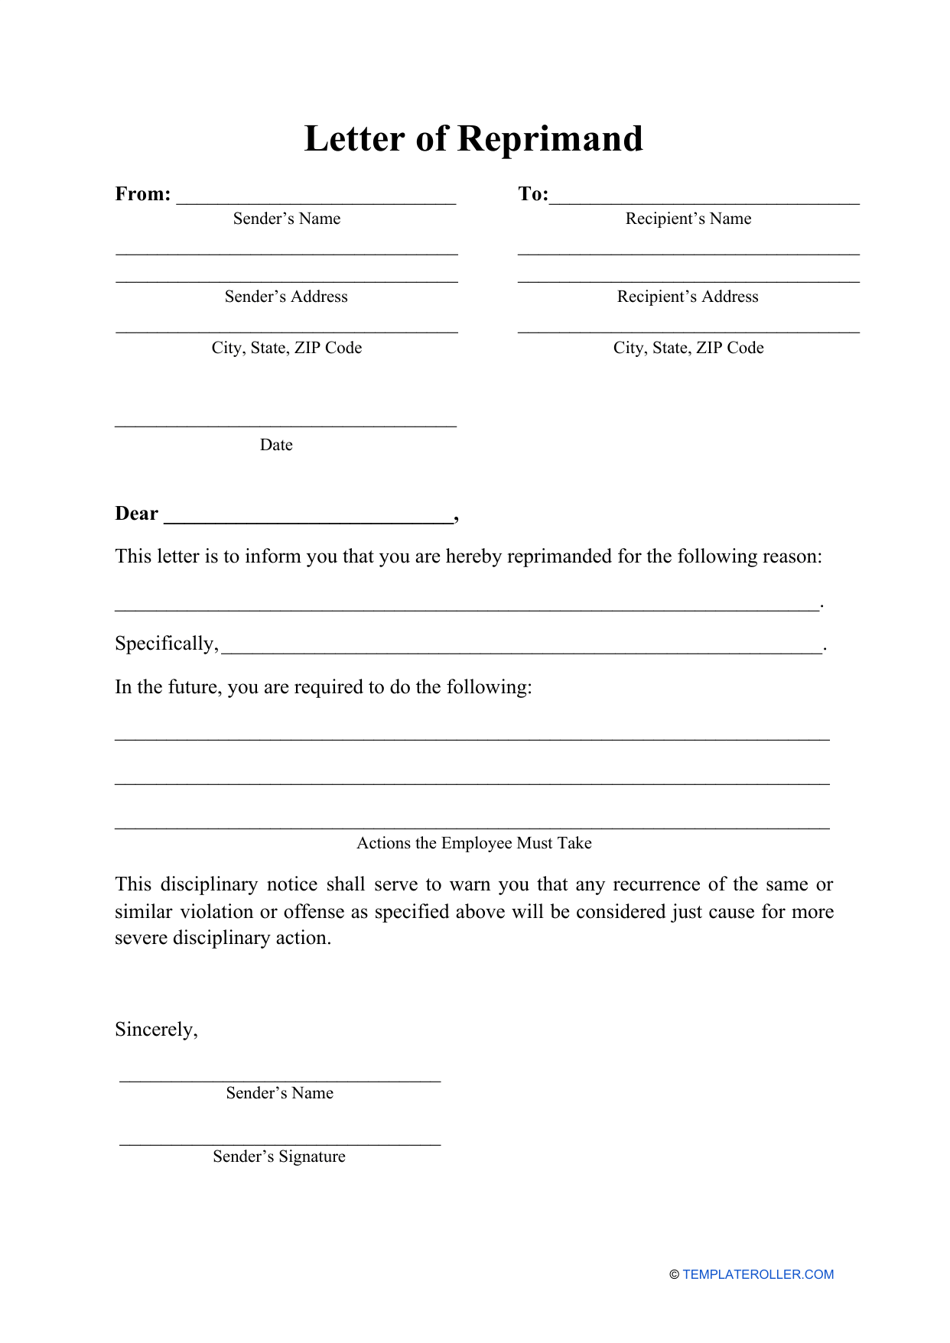 Letter of Reprimand Template Preview